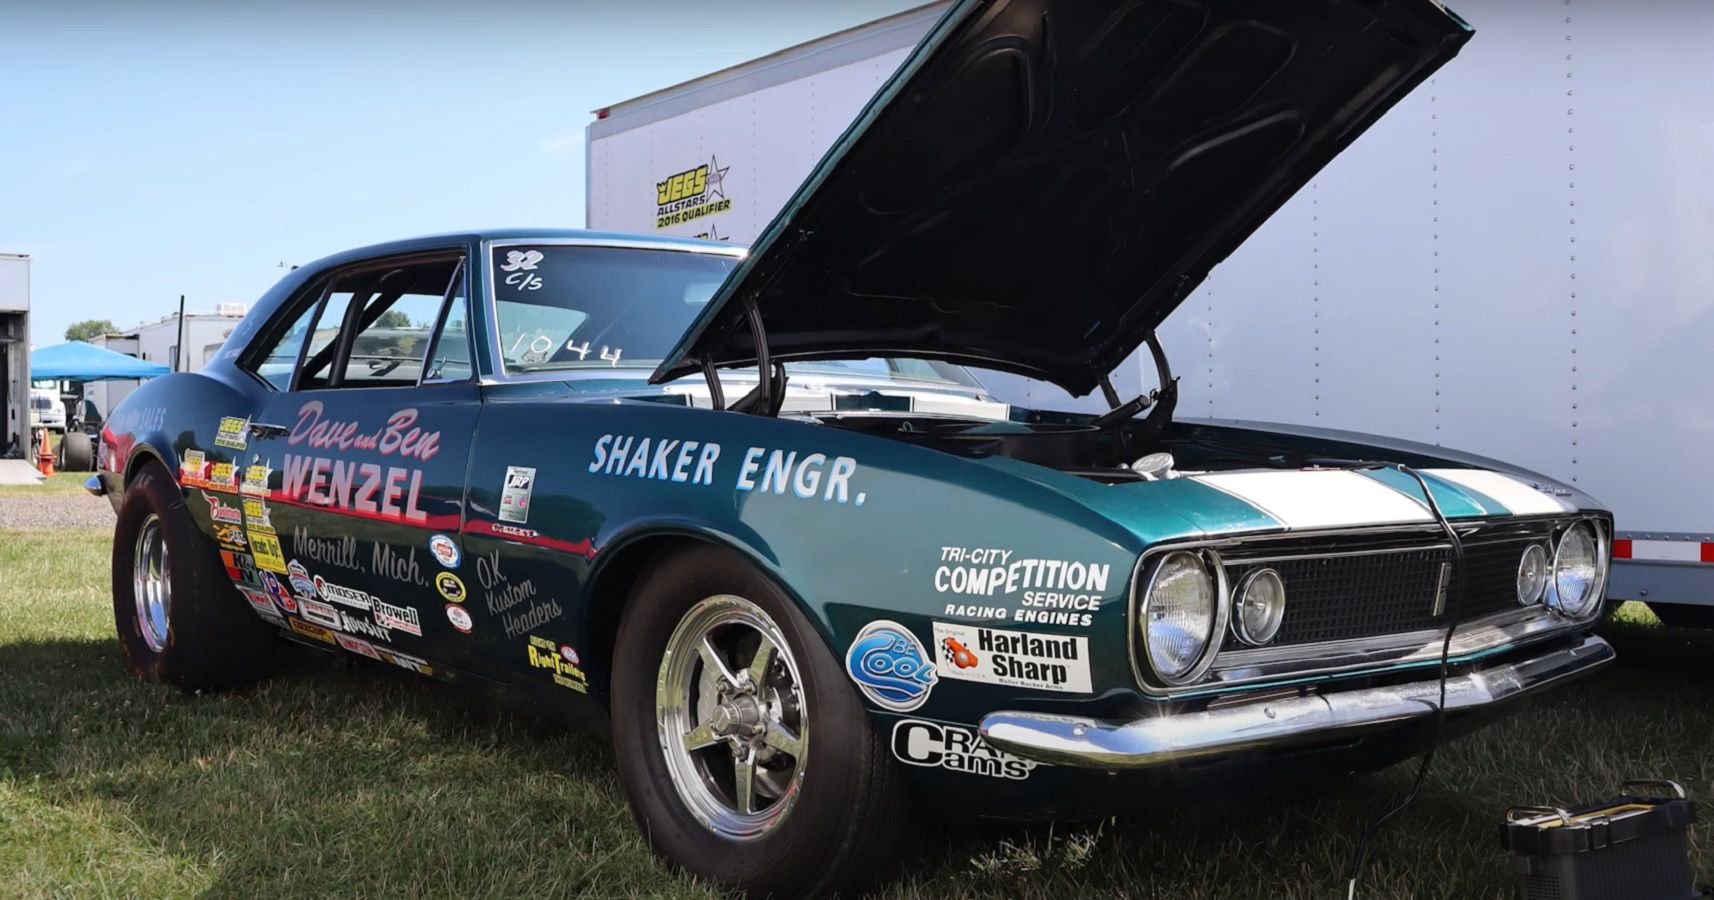 1st Chevrolet Camaro To Win NHRA Event Still Going Strong After 55 Years